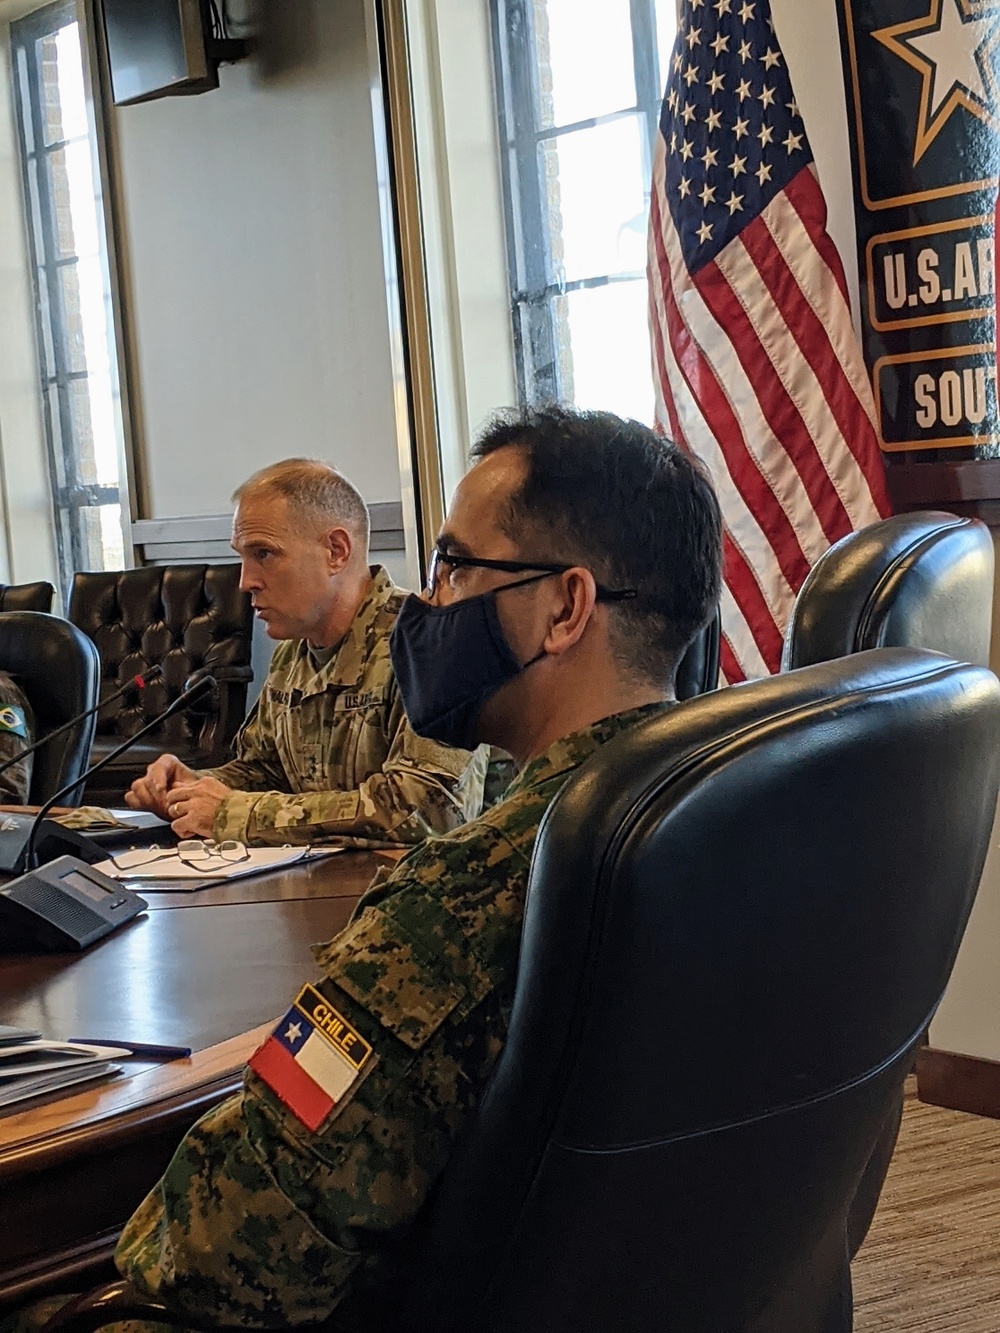 15th Annual U.S.-Chilean Army Staff Talks concludes with optimism for 2021 training opportunities